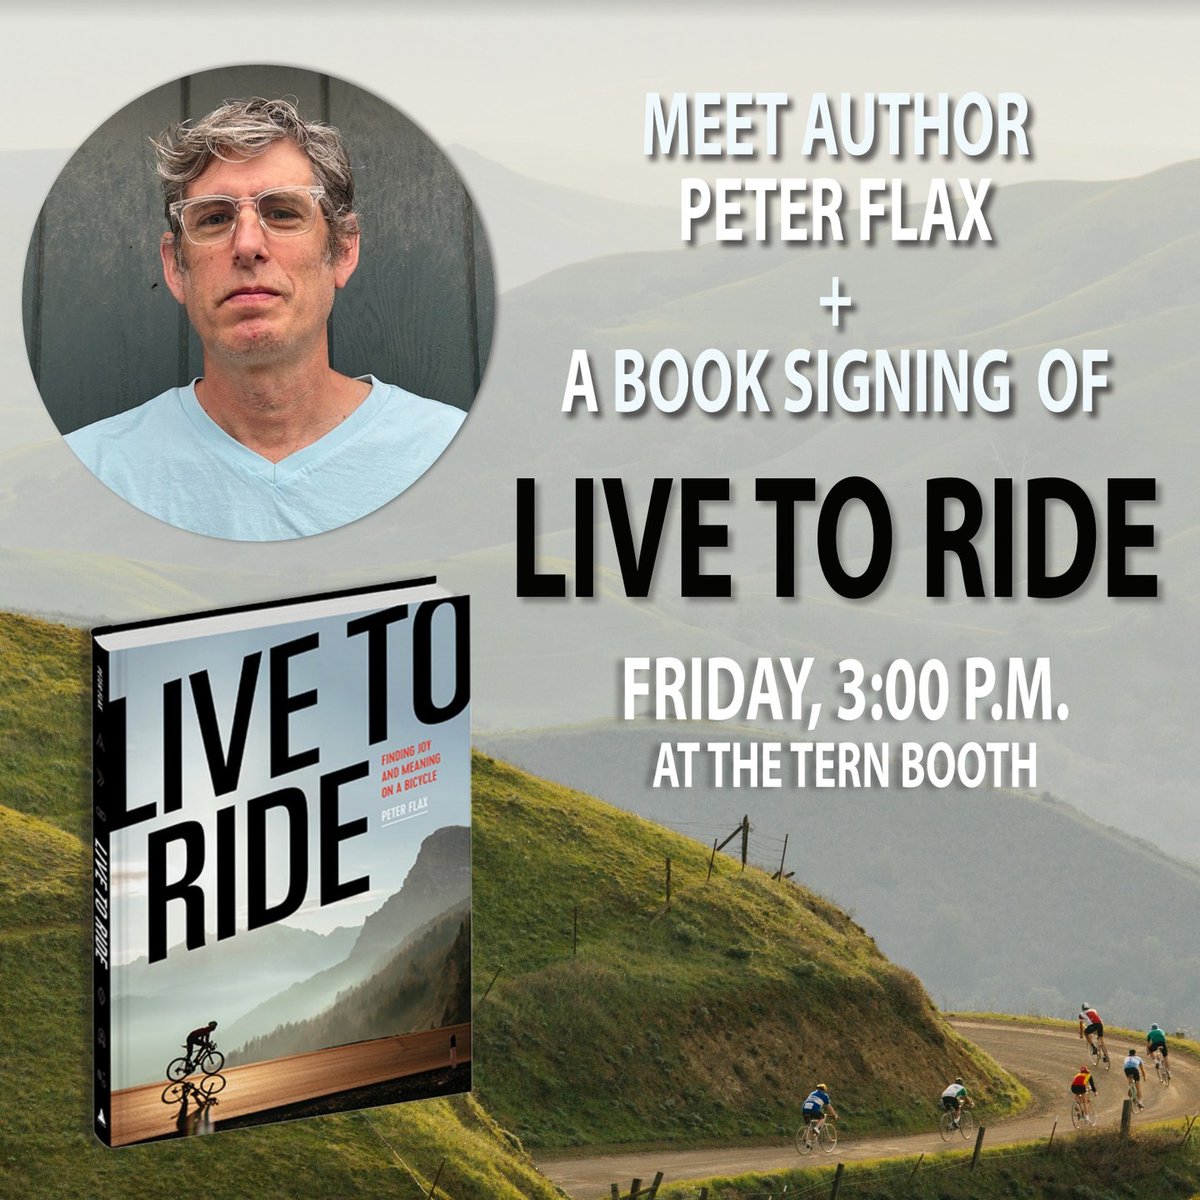 Also, our friend @pflax1 will be at the booth on Friday, around 3pm to discuss his new book 'Live to Ride'. Come by and say hi!!